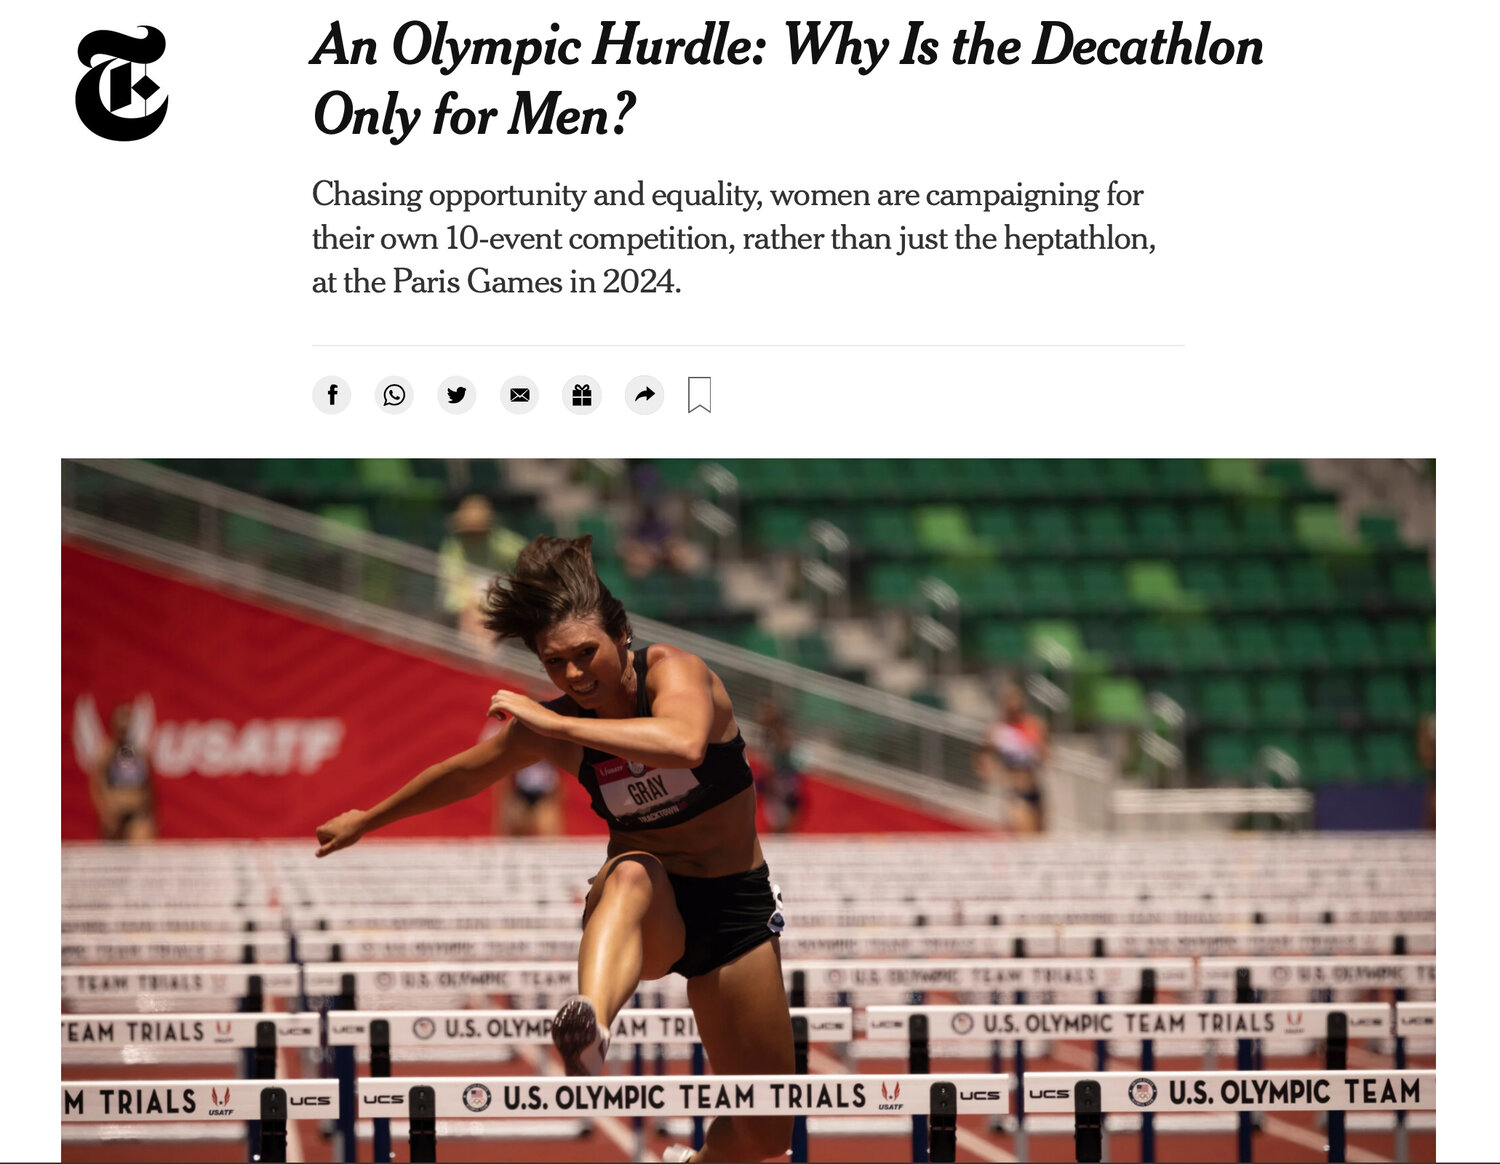 THE LET WOMEN DECATHLON MOVEMENT IS COMMITTED TO PROMOTING GENDER EQUALITY  IN THE OLYMPIC GAMES., Heaven to the Yeah, Nonprofit Organization